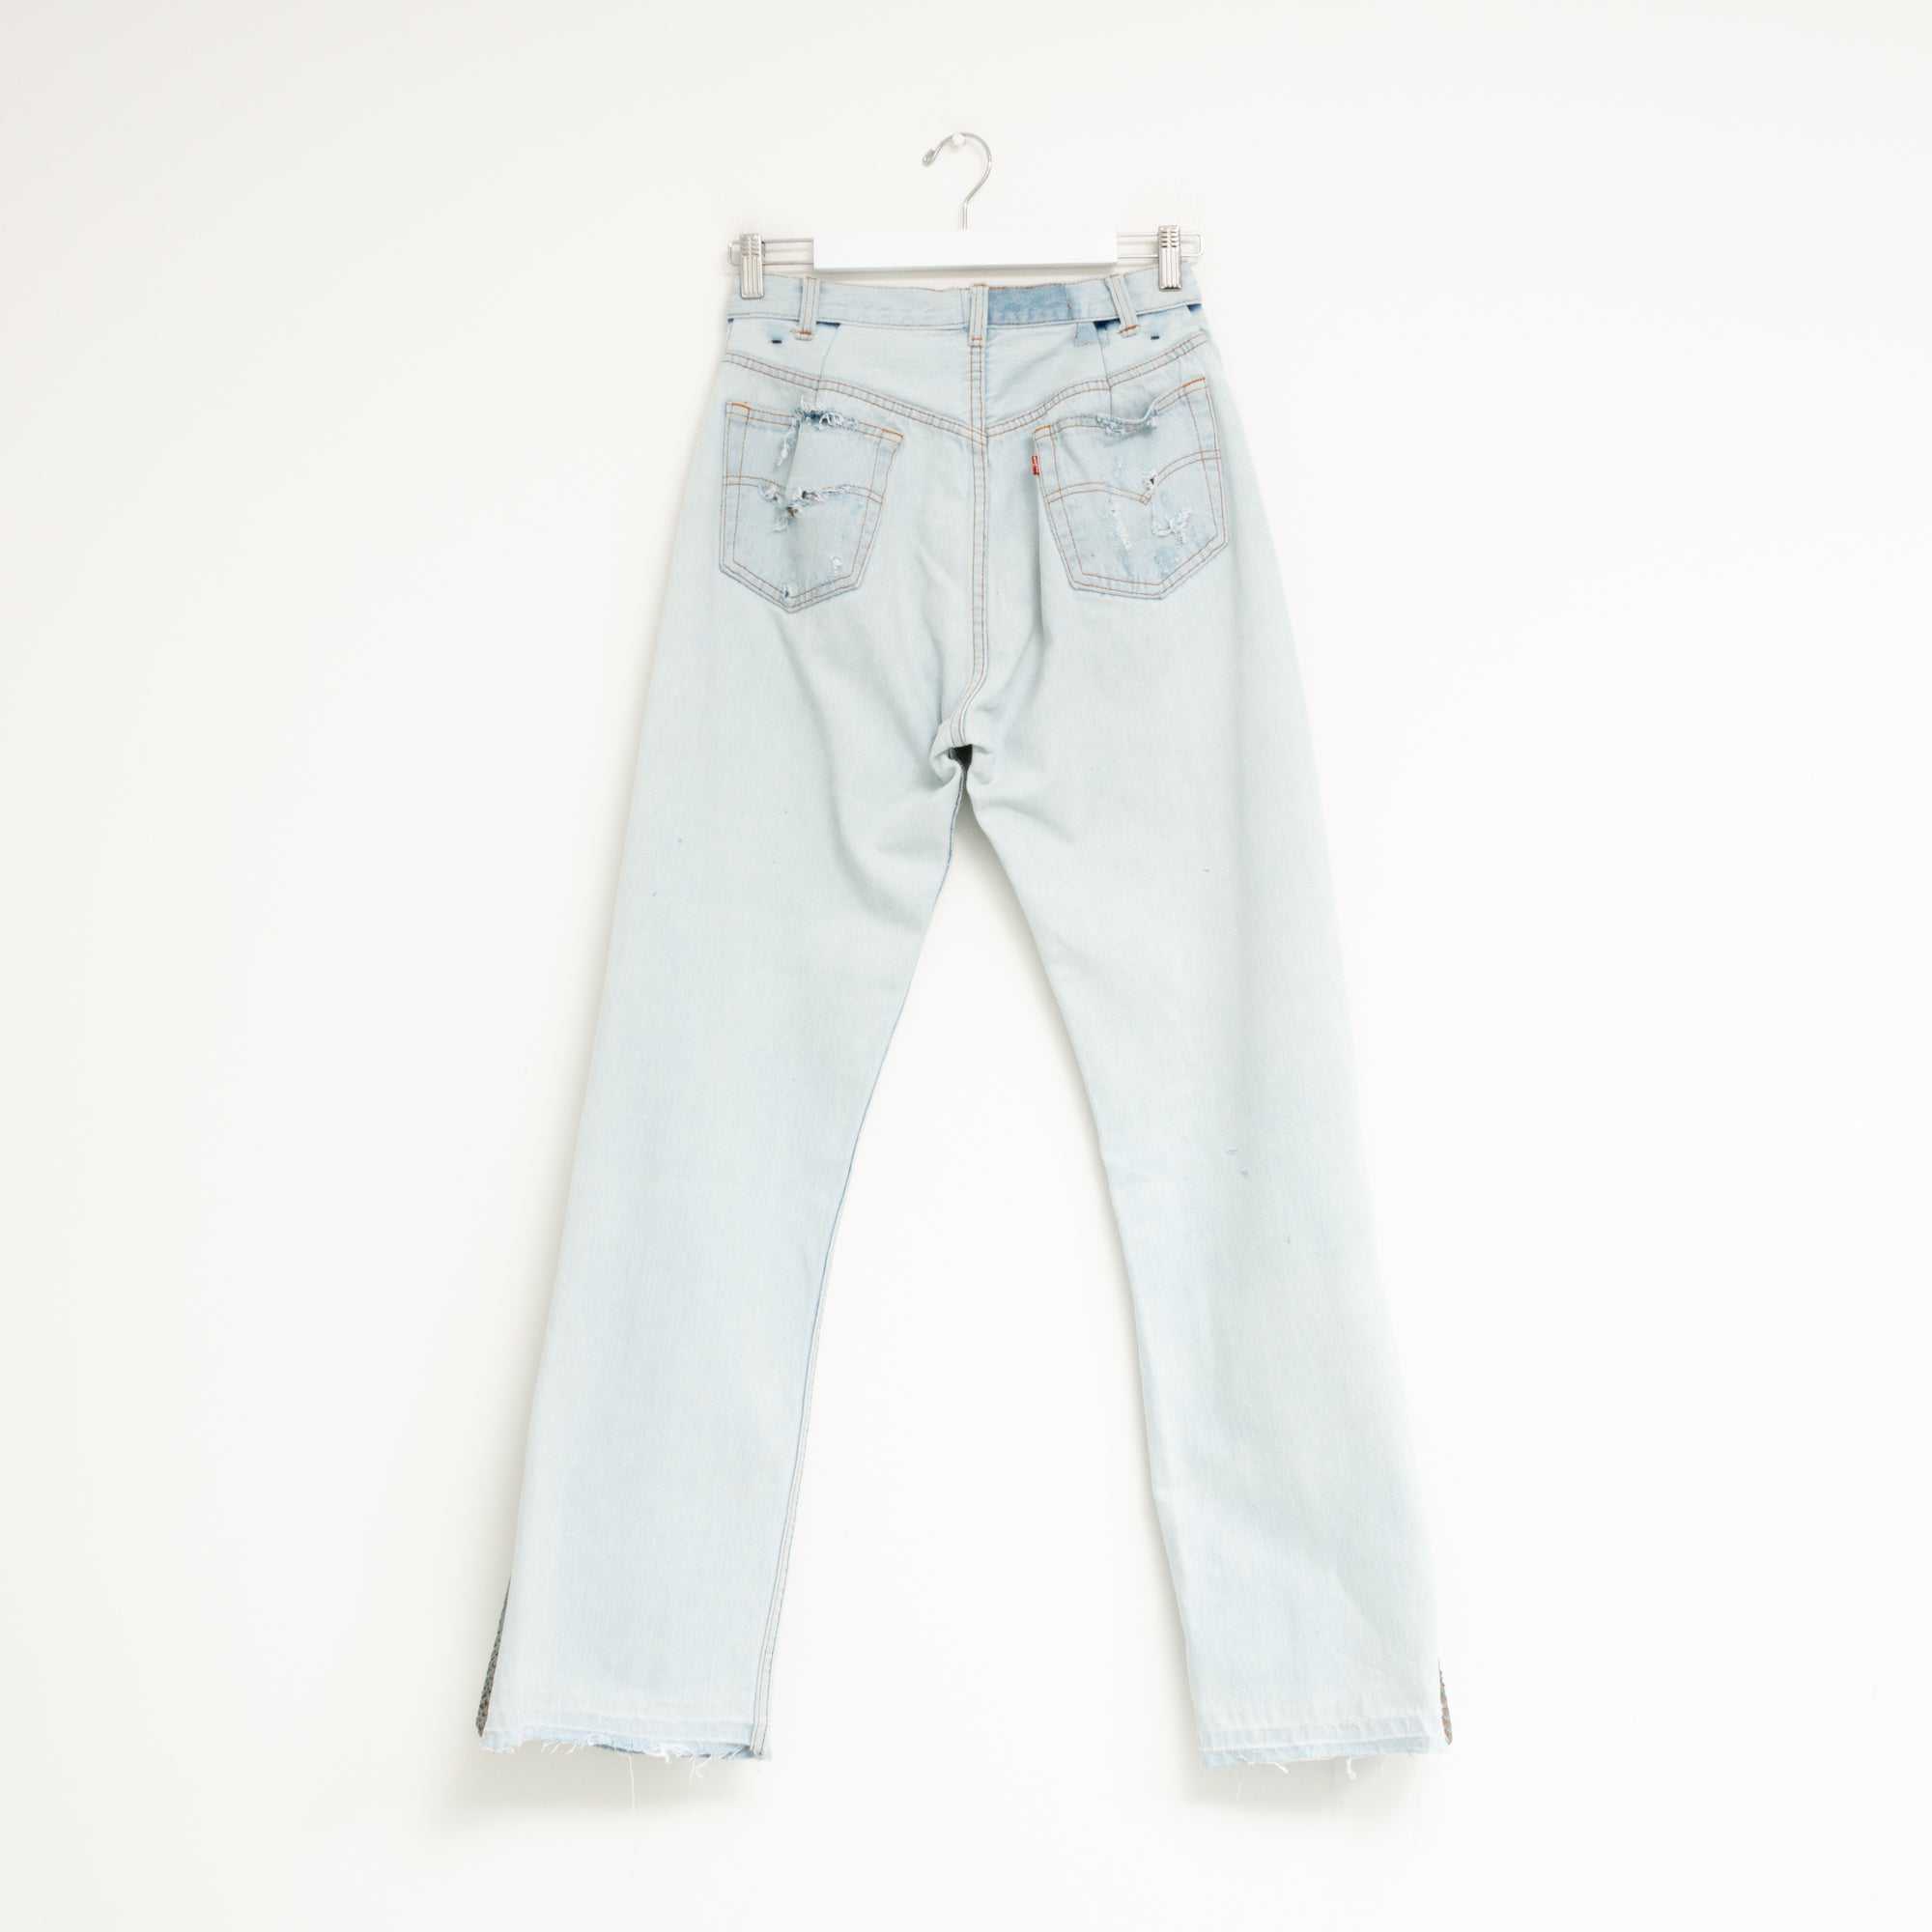 "LE FLARE" Jeans W29 L33